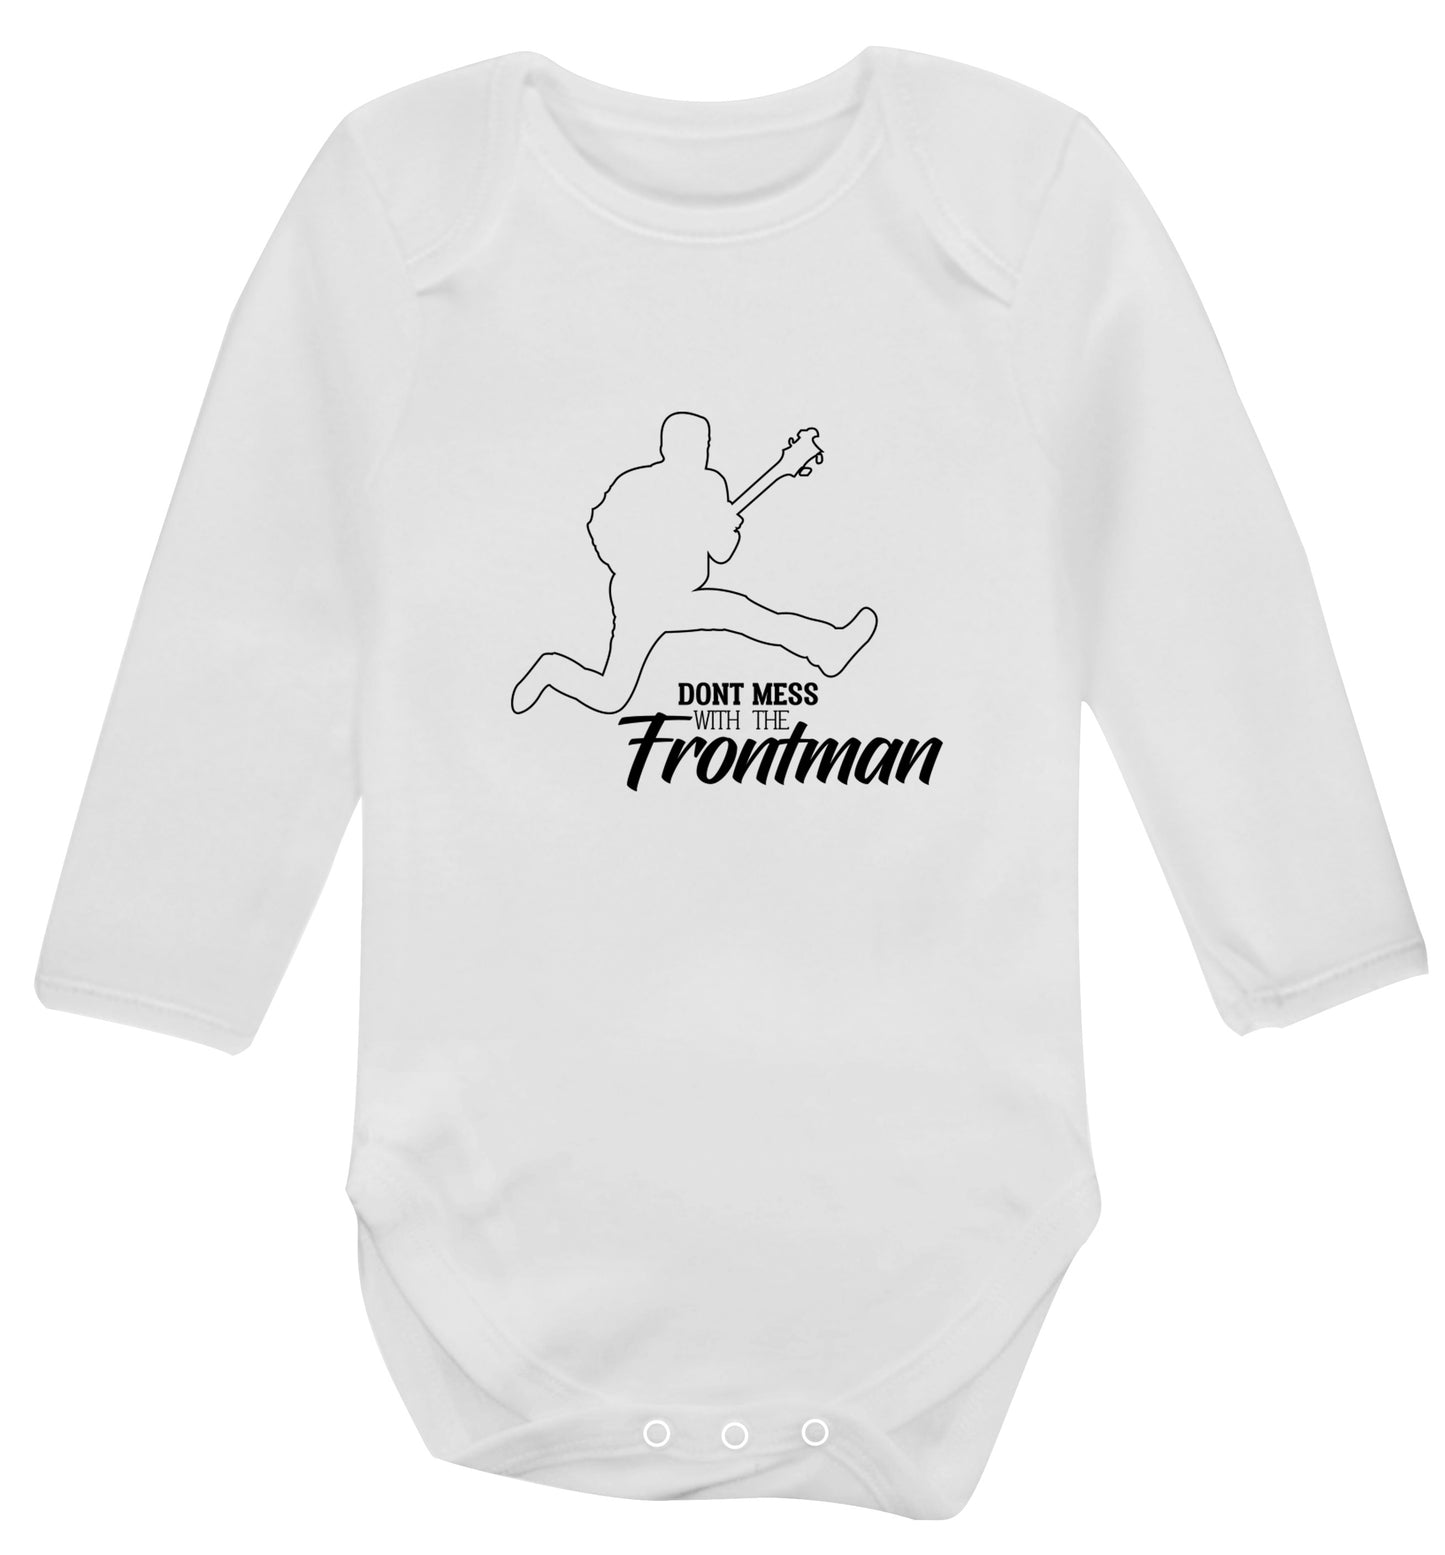 Don't mess with the frontman Baby Vest long sleeved white 6-12 months